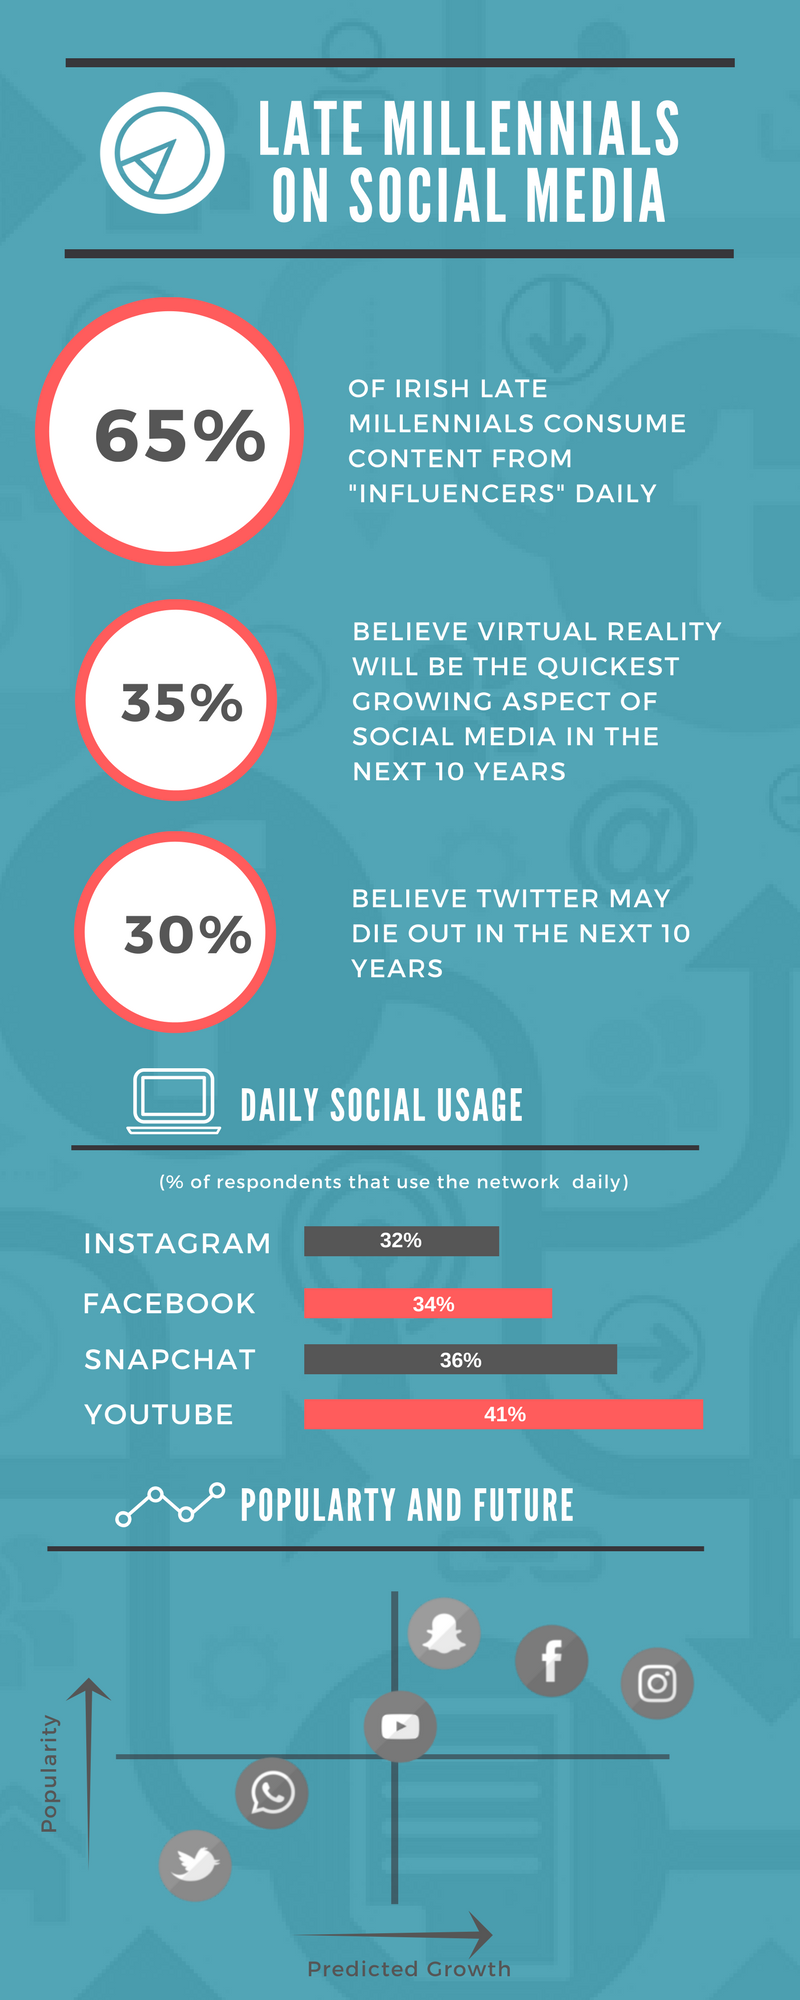 Report: Engaging With Late Millennials on Social Media